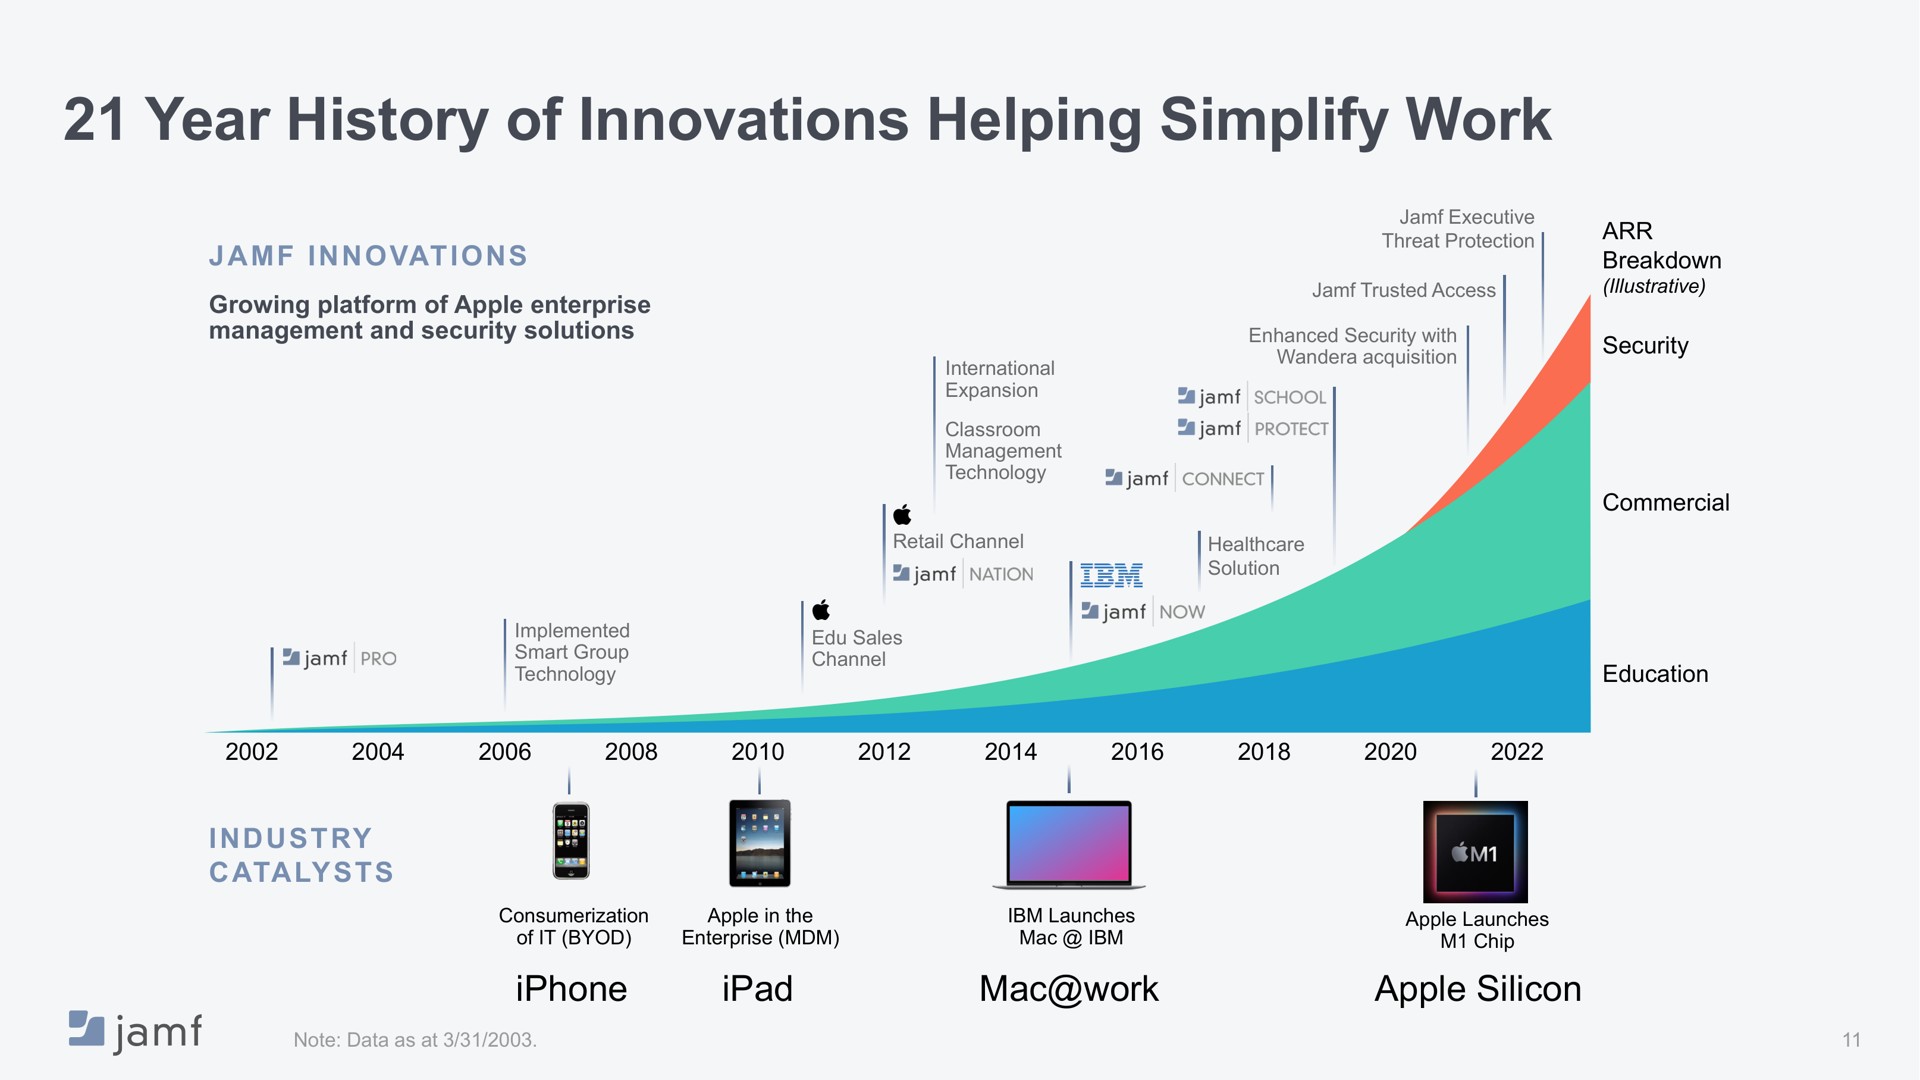 year history of innovations helping simplify work | Jamf